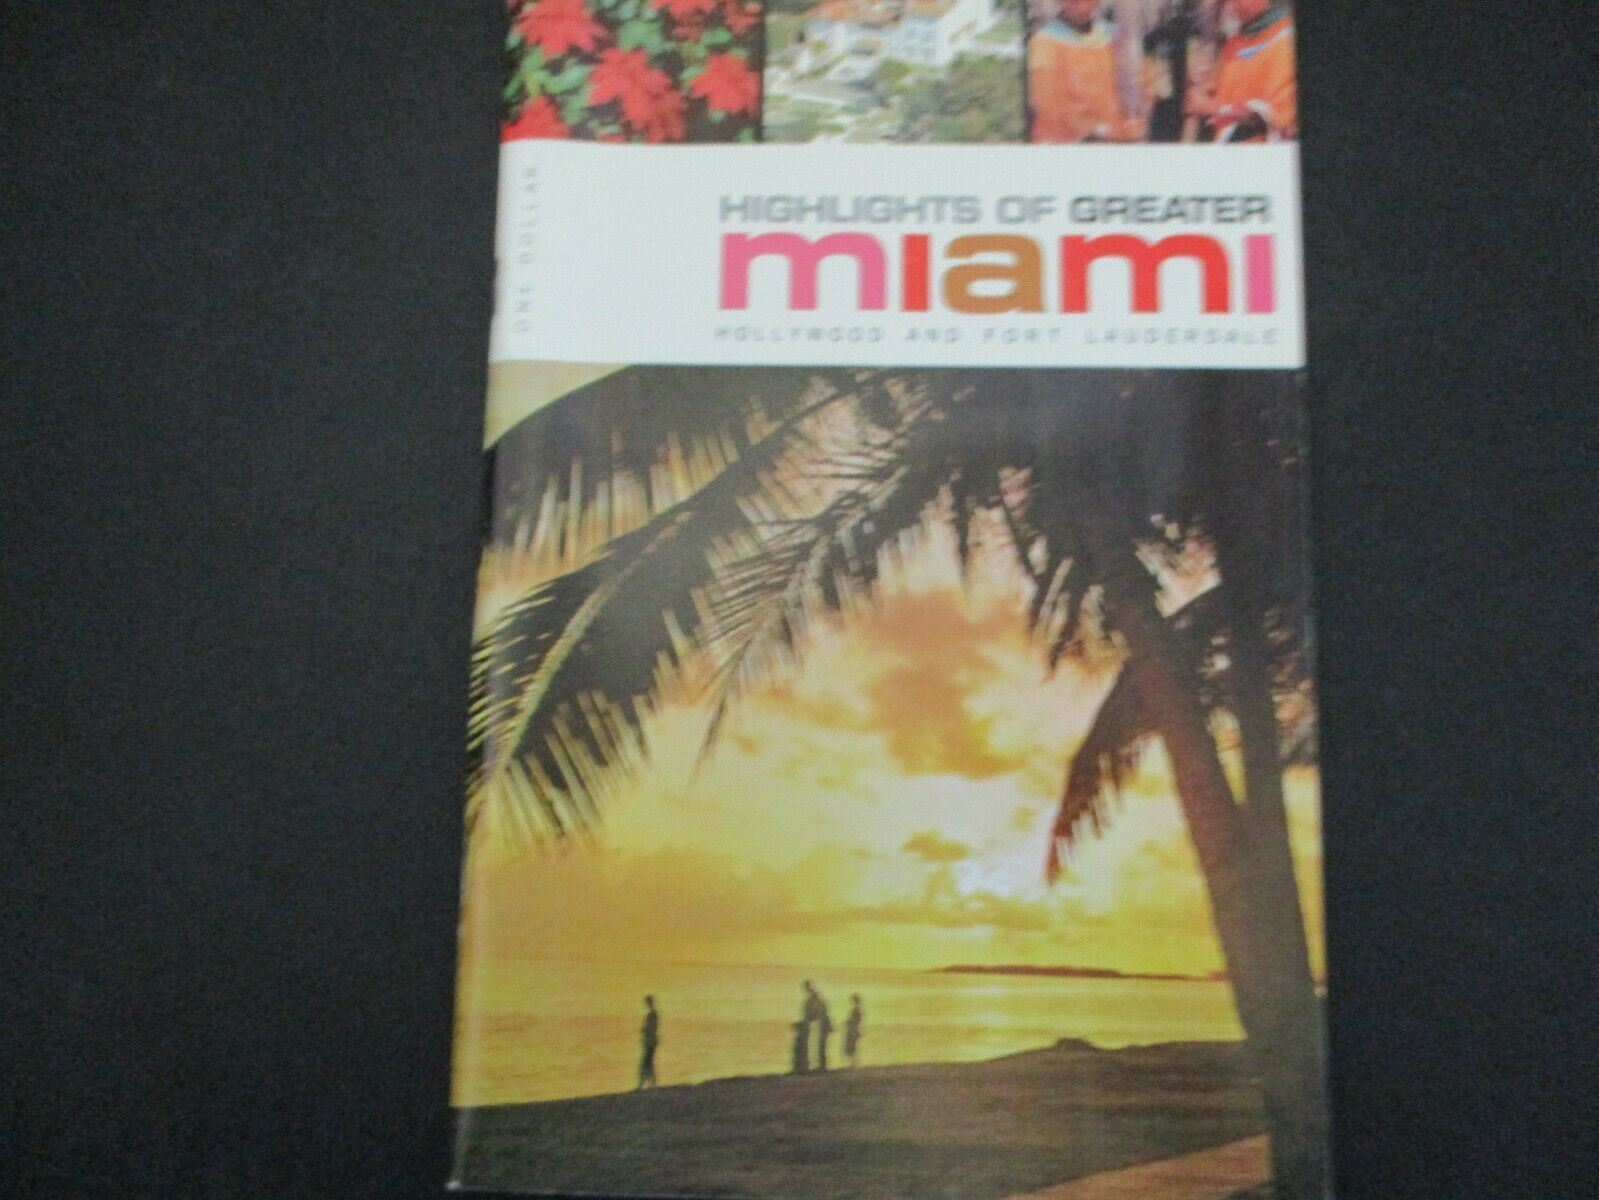 Highlights Of Greater Miami Hollywood and Fort Lauderdale travel book